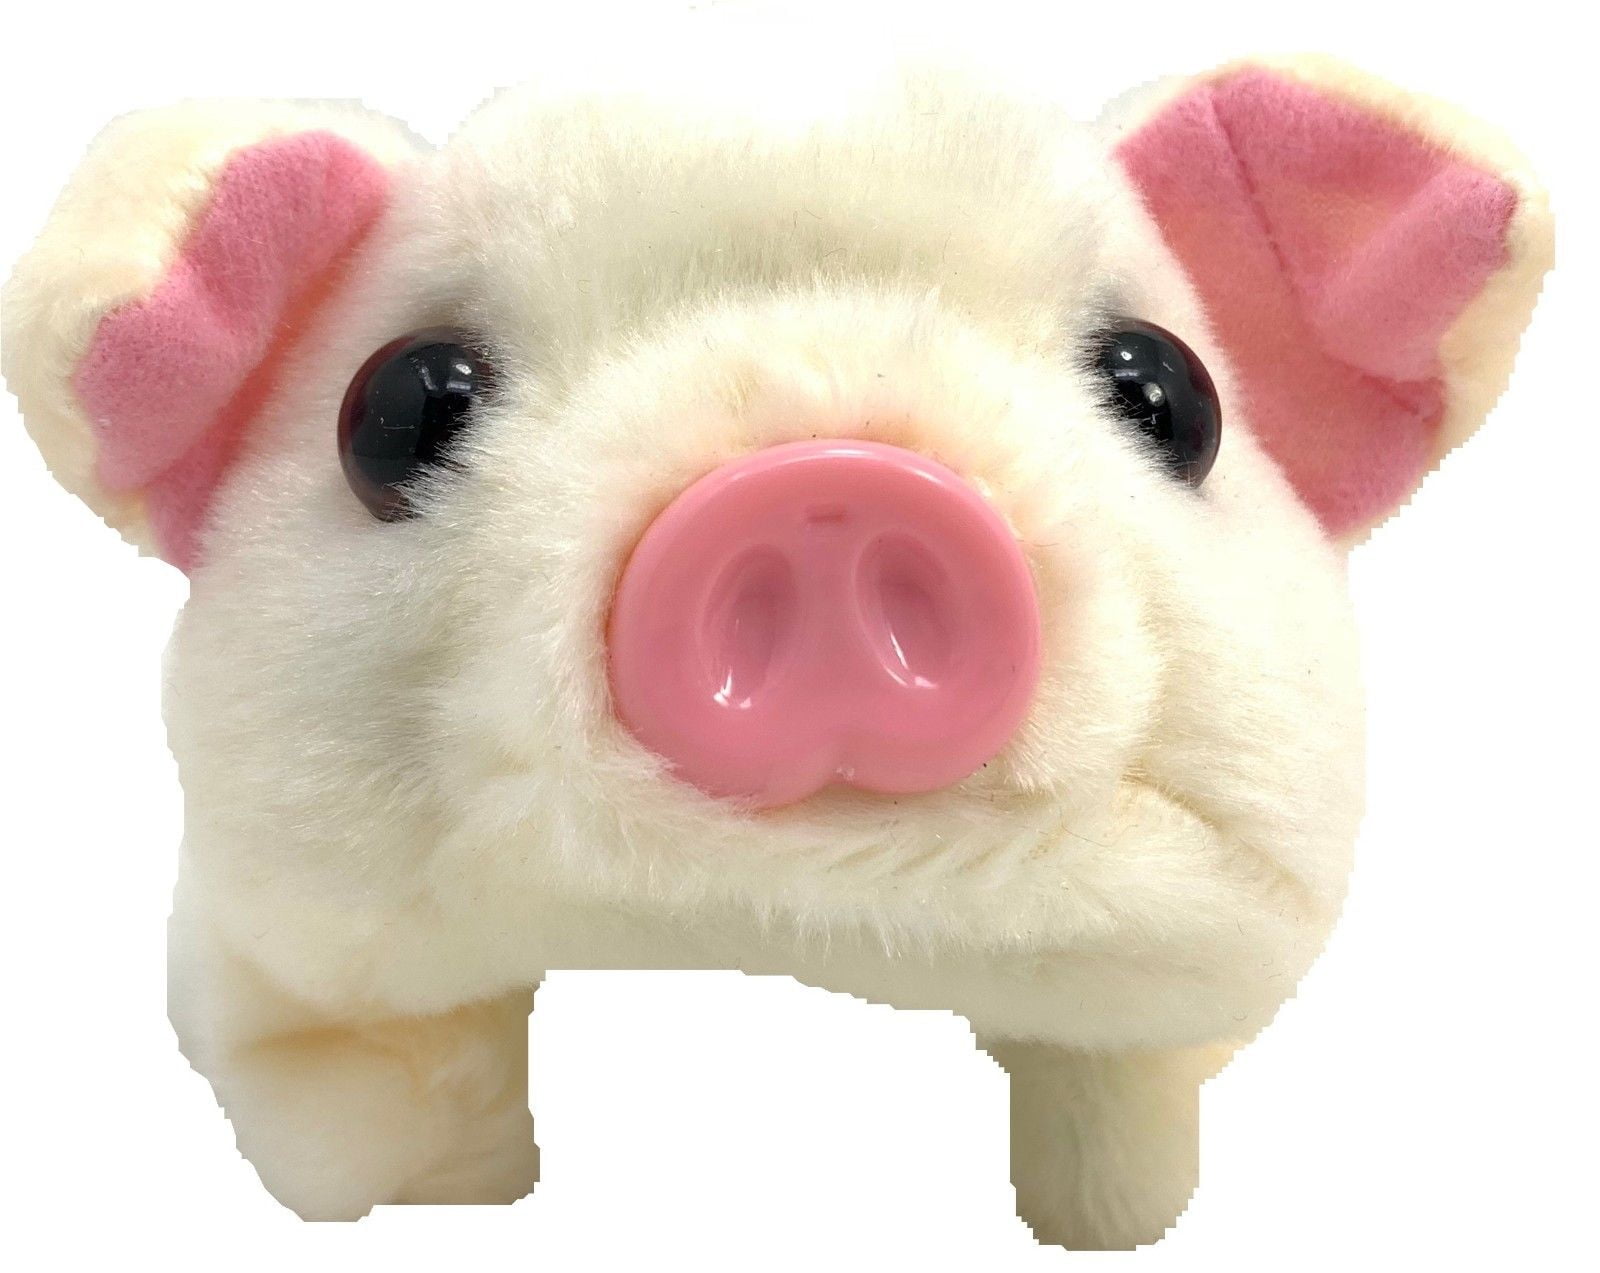 BLACK FUZZY WALKING OINKING TOY MOVING PIG play pet battery operated LIGHT EYES 